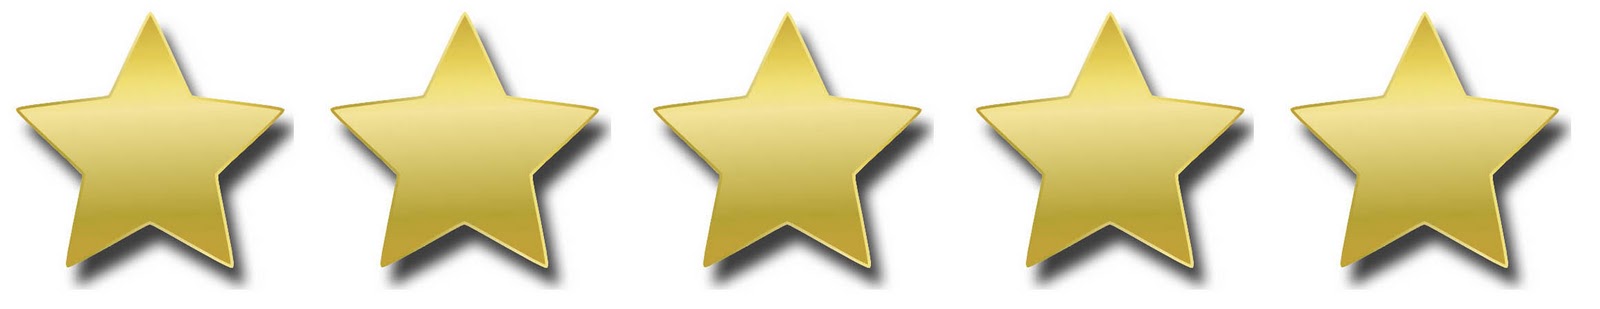 Gold 5 Star Rating   Page 1   Clipart Best   Clipart Best